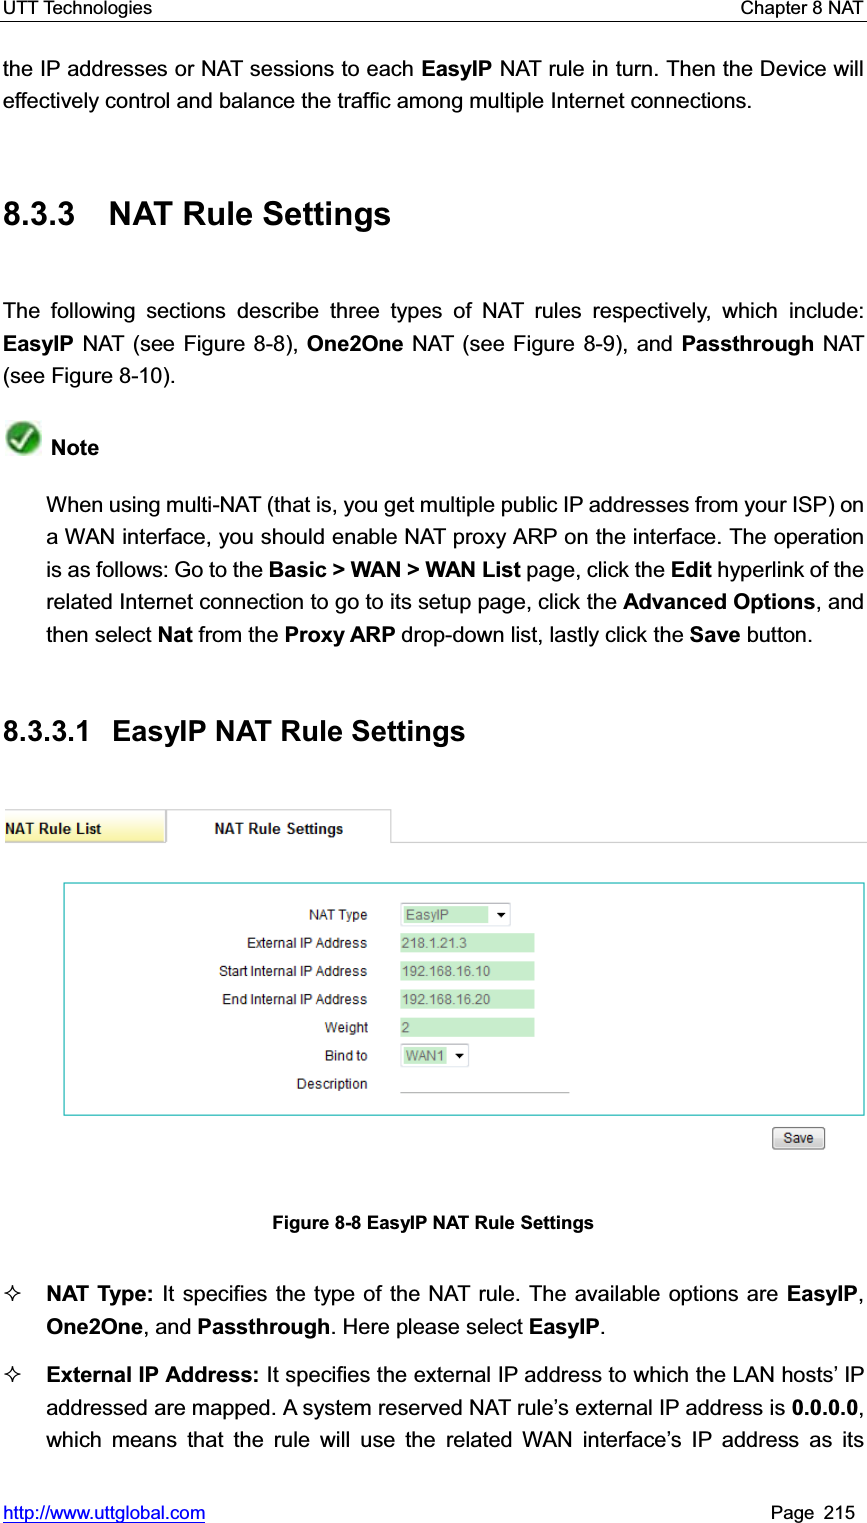 UTT Technologies    Chapter 8 NAT   http://www.uttglobal.com Page 215 the IP addresses or NAT sessions to each EasyIP NAT rule in turn. Then the Device will effectively control and balance the traffic among multiple Internet connections. 8.3.3 NAT Rule Settings The following sections describe three types of NAT rules respectively, which include: EasyIP NAT (see Figure 8-8), One2One NAT (see Figure 8-9), and Passthrough NAT (see Figure 8-10). NoteWhen using multi-NAT (that is, you get multiple public IP addresses from your ISP) on a WAN interface, you should enable NAT proxy ARP on the interface. The operation is as follows: Go to the Basic &gt; WAN &gt; WAN List page, click the Edit hyperlink of the related Internet connection to go to its setup page, click the Advanced Options, and then select Nat from the Proxy ARP drop-down list, lastly click the Save button. 8.3.3.1  EasyIP NAT Rule Settings Figure 8-8 EasyIP NAT Rule Settings NAT Type: It specifies the type of the NAT rule. The available options are EasyIP,One2One, and Passthrough. Here please select EasyIP.External IP Address: It specifies the external IP address to which the LAN hosts¶ IP addressed are mapped. A system reserved NAT rule¶s external IP address is 0.0.0.0,which means that the rule will use the related WAN interface¶s IP address as its 